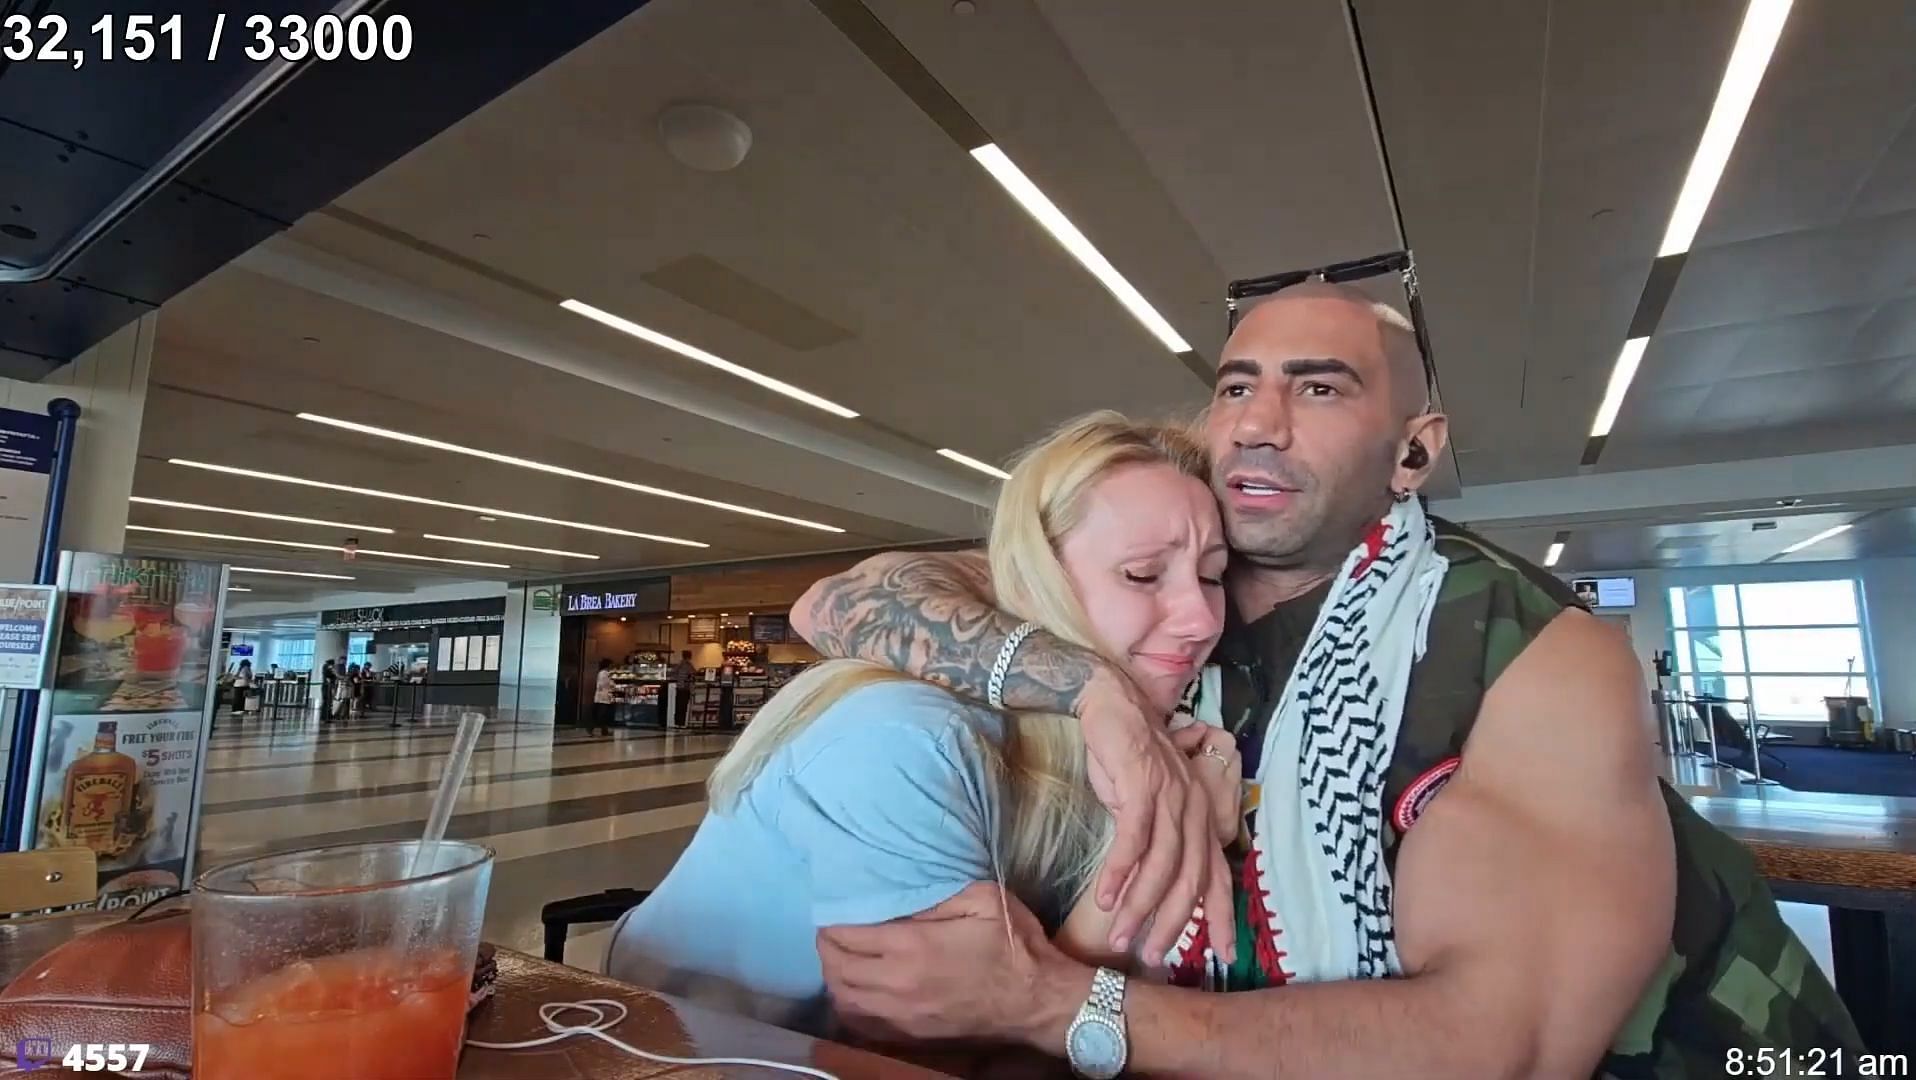 Twitch streamer and YouTuber Fousey accused of taking advantage of drunk woman image pic